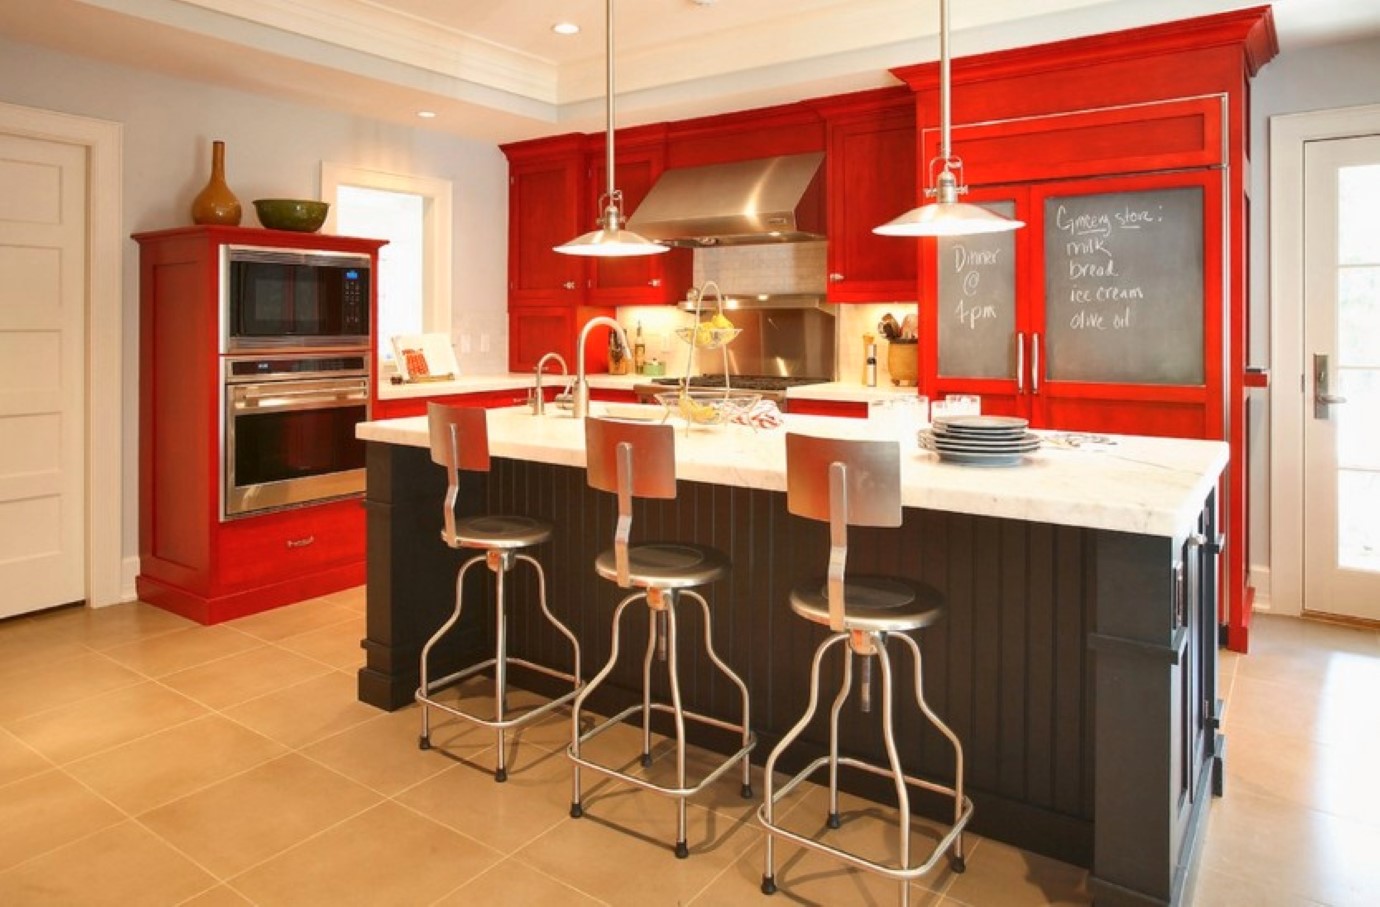 Barstools Design Red Unique Barstools Design Feat Cool Red Kitchen Cabinets And Chalkboard Refrigerator Door Idea Kitchen  Create Incredible Kitchen With Red Kitchen Cabinet 